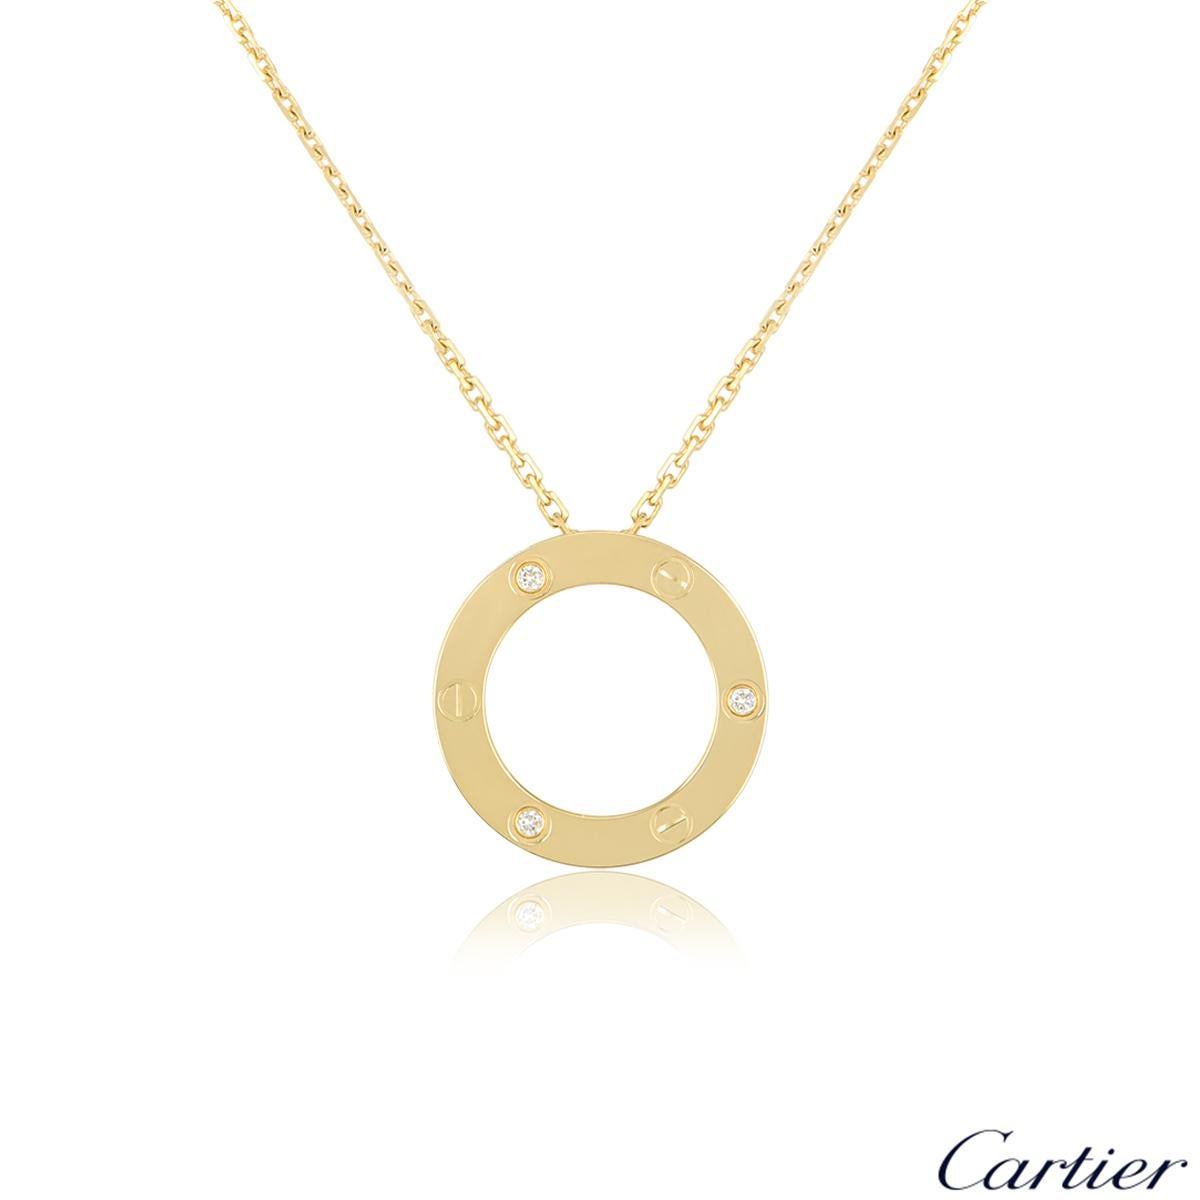 An 18k yellow gold diamond set pendant from the Cartier Love collection. The pendant is composed of an open work circular motif, set to the outer edges with three round brilliant cut diamonds totaling 0.07ct alternating between the iconic screw